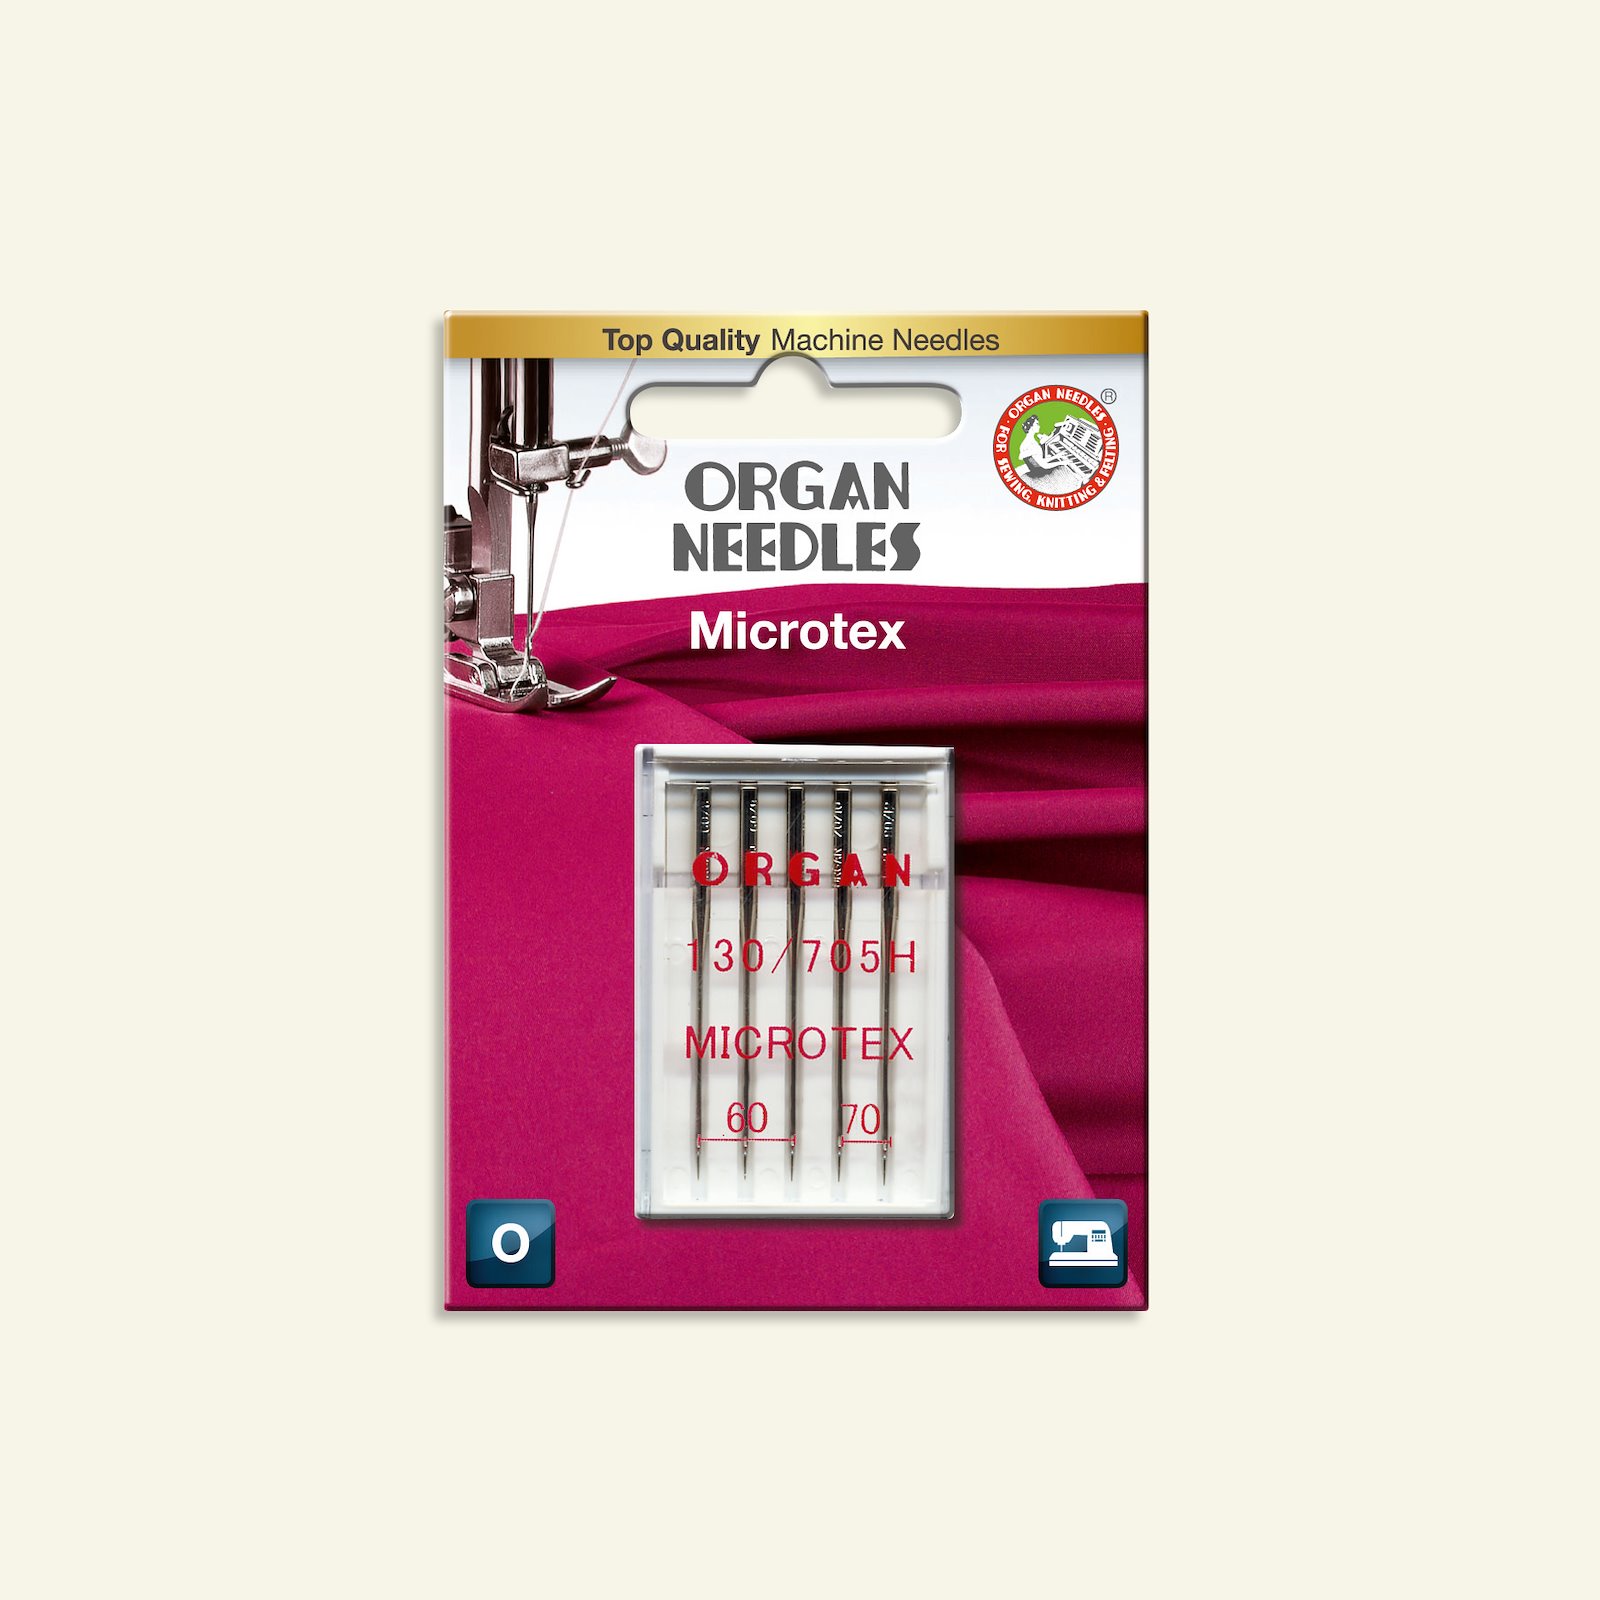 Microtex needle 130/705 size 60/3, 70/2 46037_pack